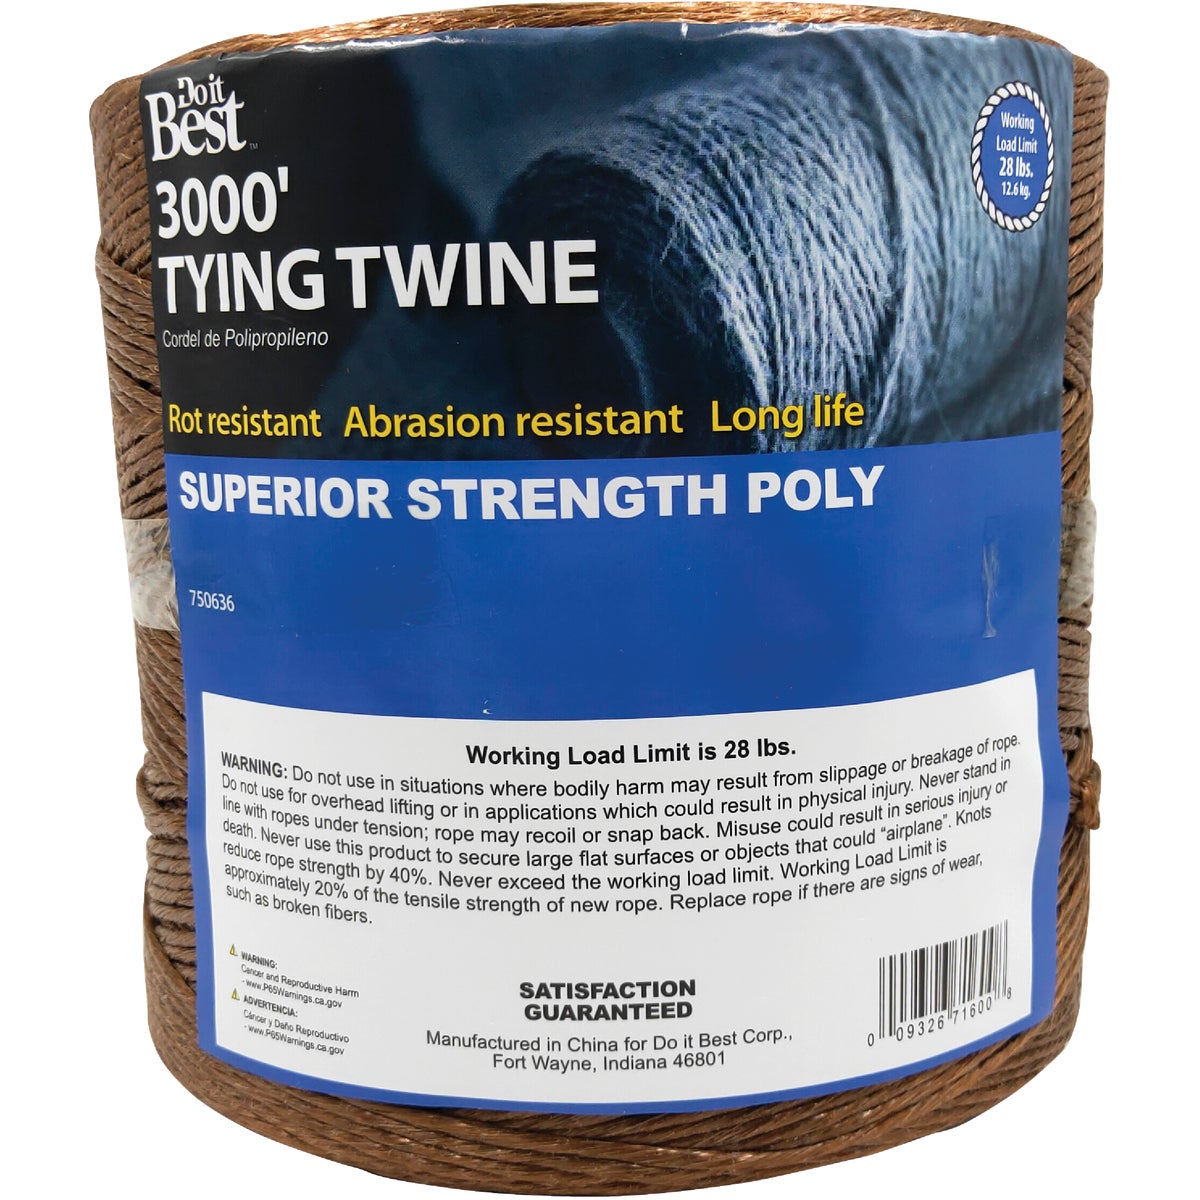 Item 750636, 100% polypropylene tying twine. A low cost sisal twine substitute.